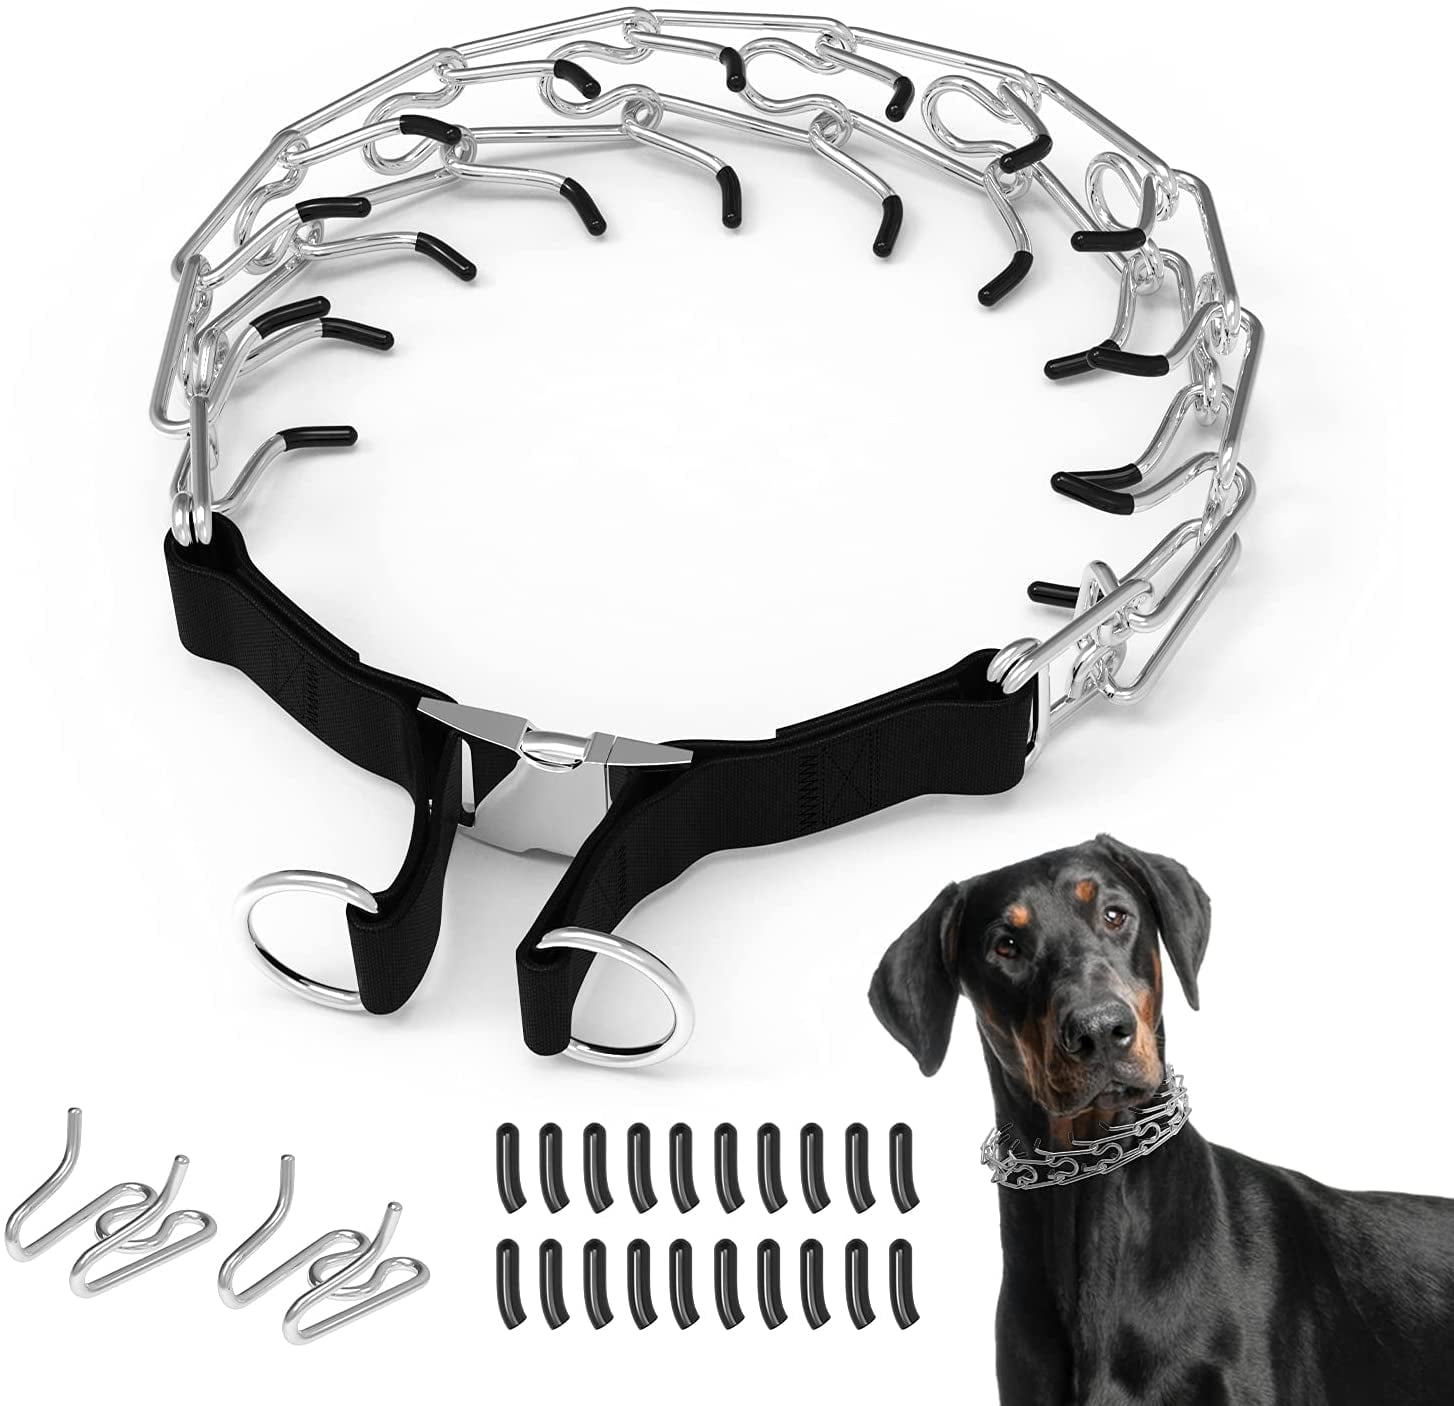 Dog Pinch Collar with Nylon Protector and Rubber Tips No Pull Stainless Steel Choke Collar for Small Medium Large Dogs Dog Prong Training Collar 